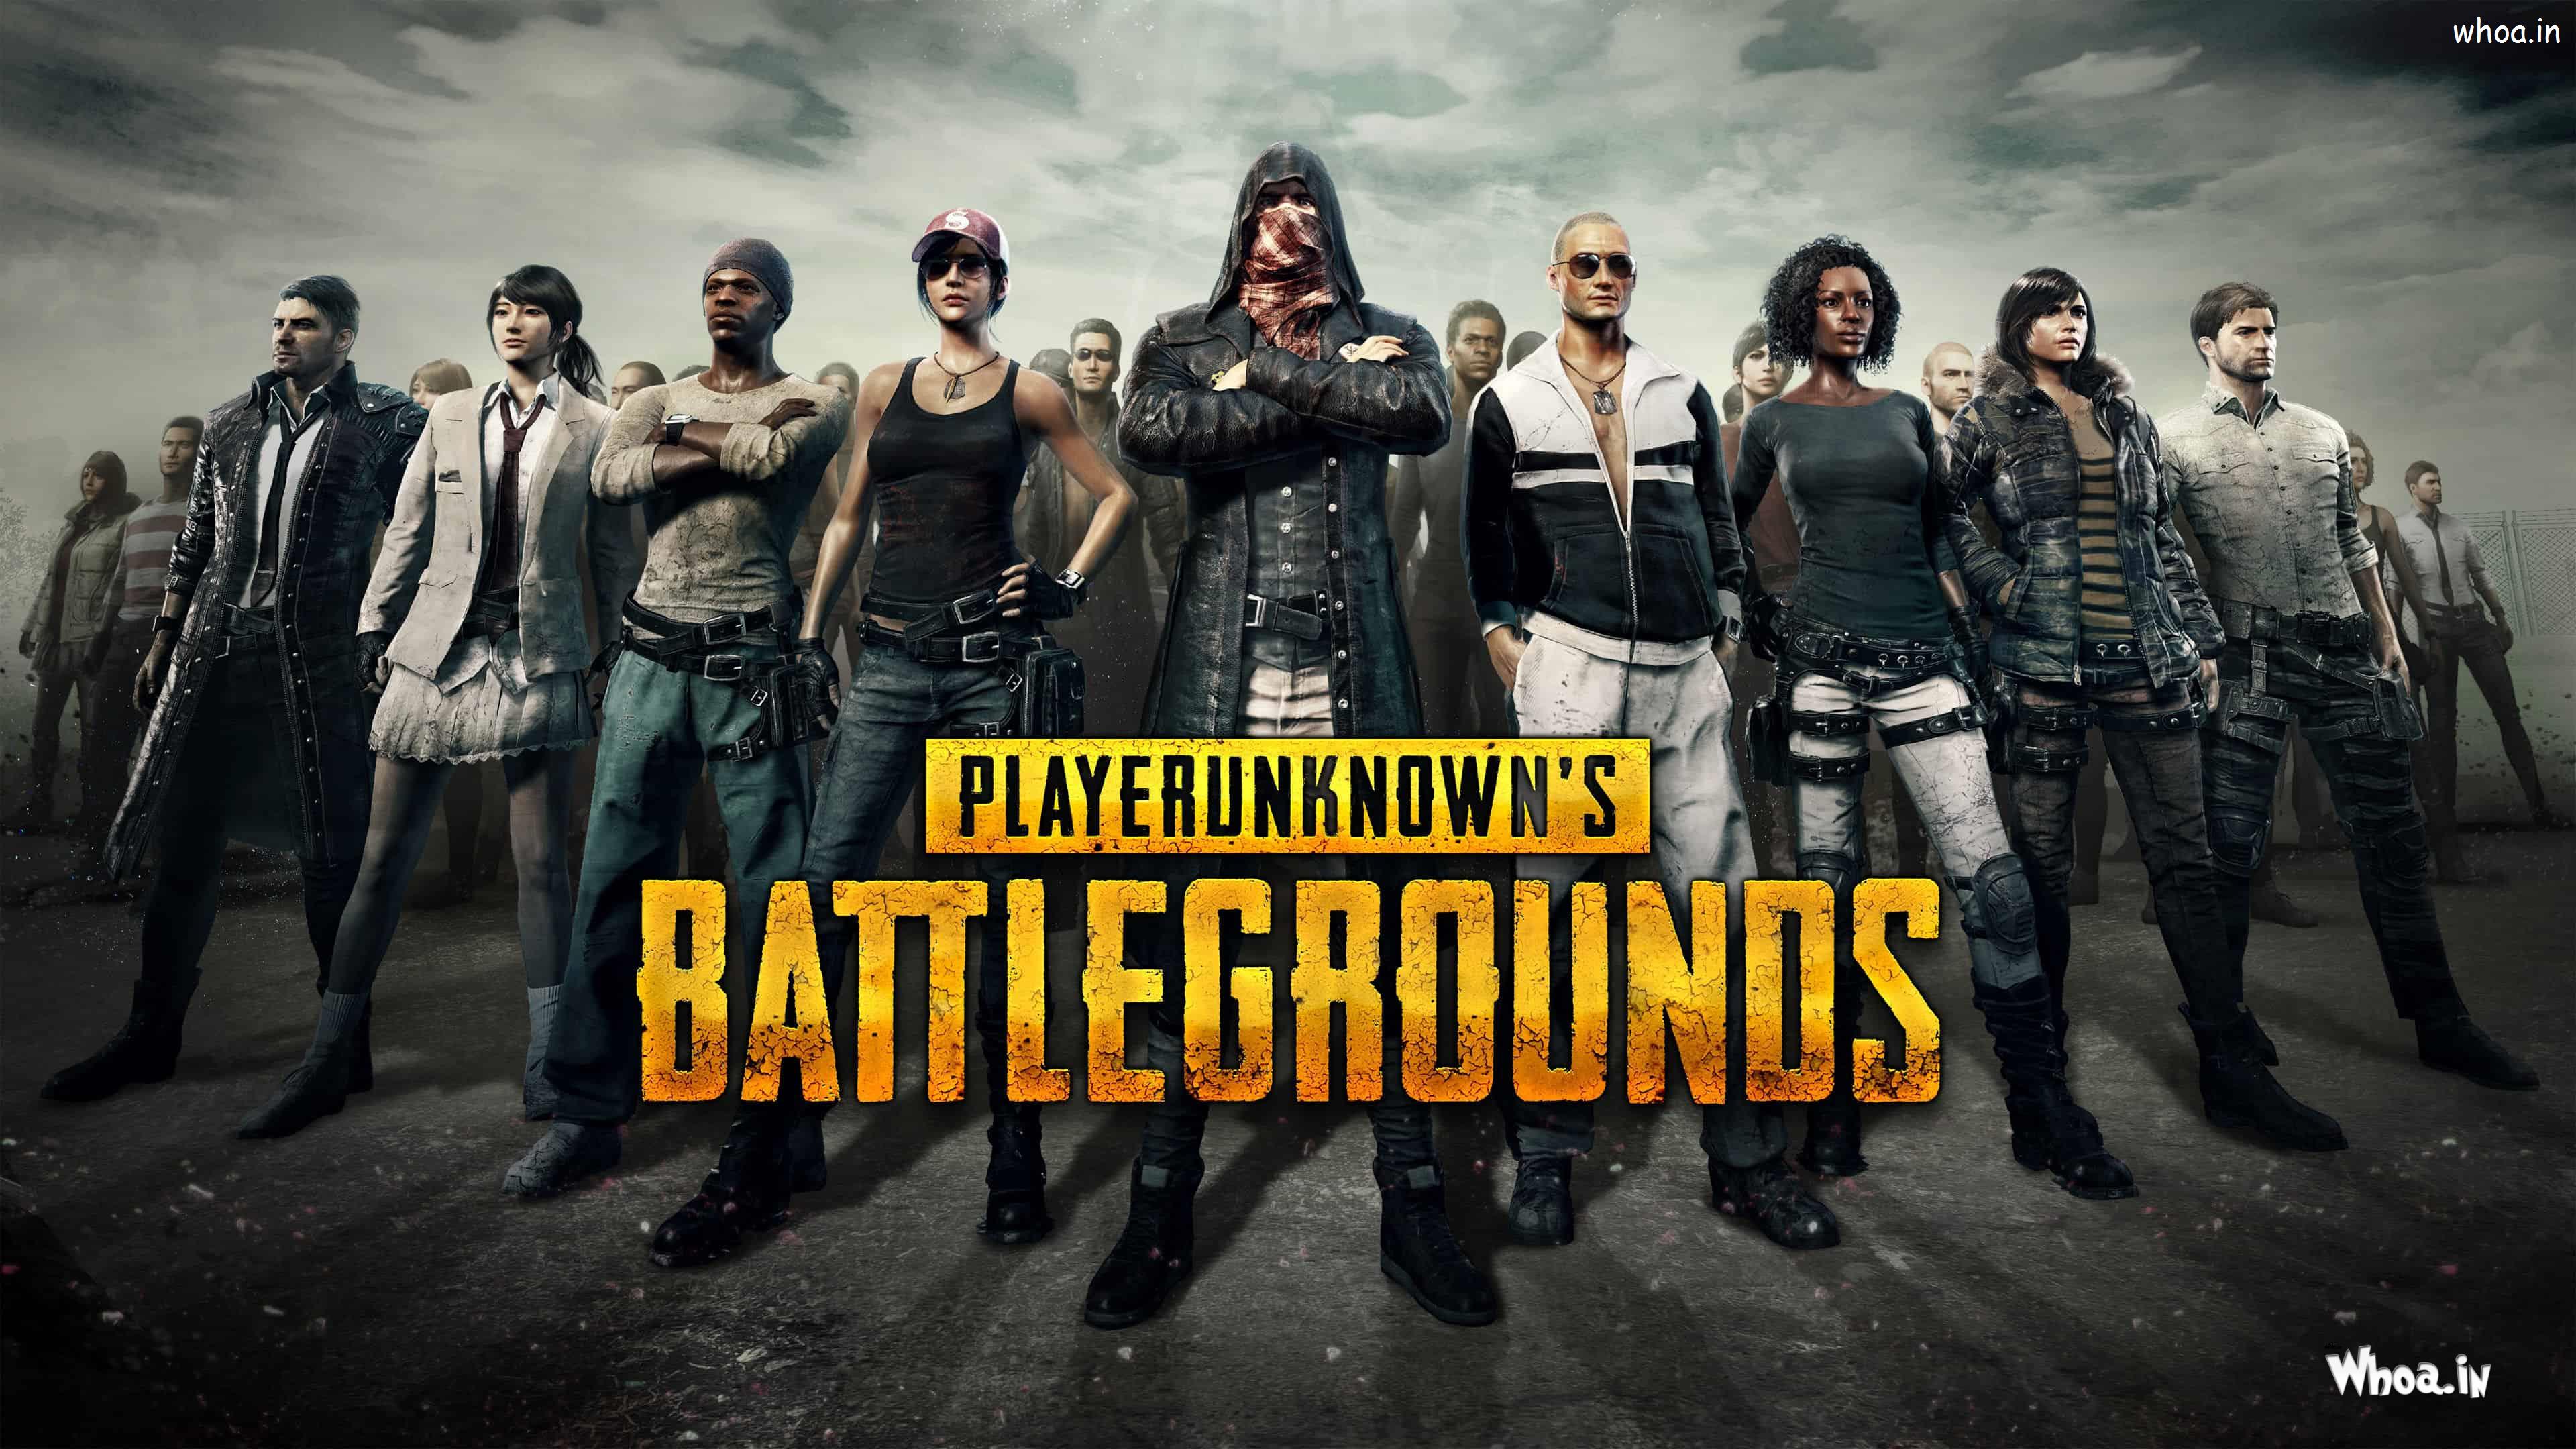 Pubg Game Images And Hd Wallpapers Trending Wallpaper Pubg